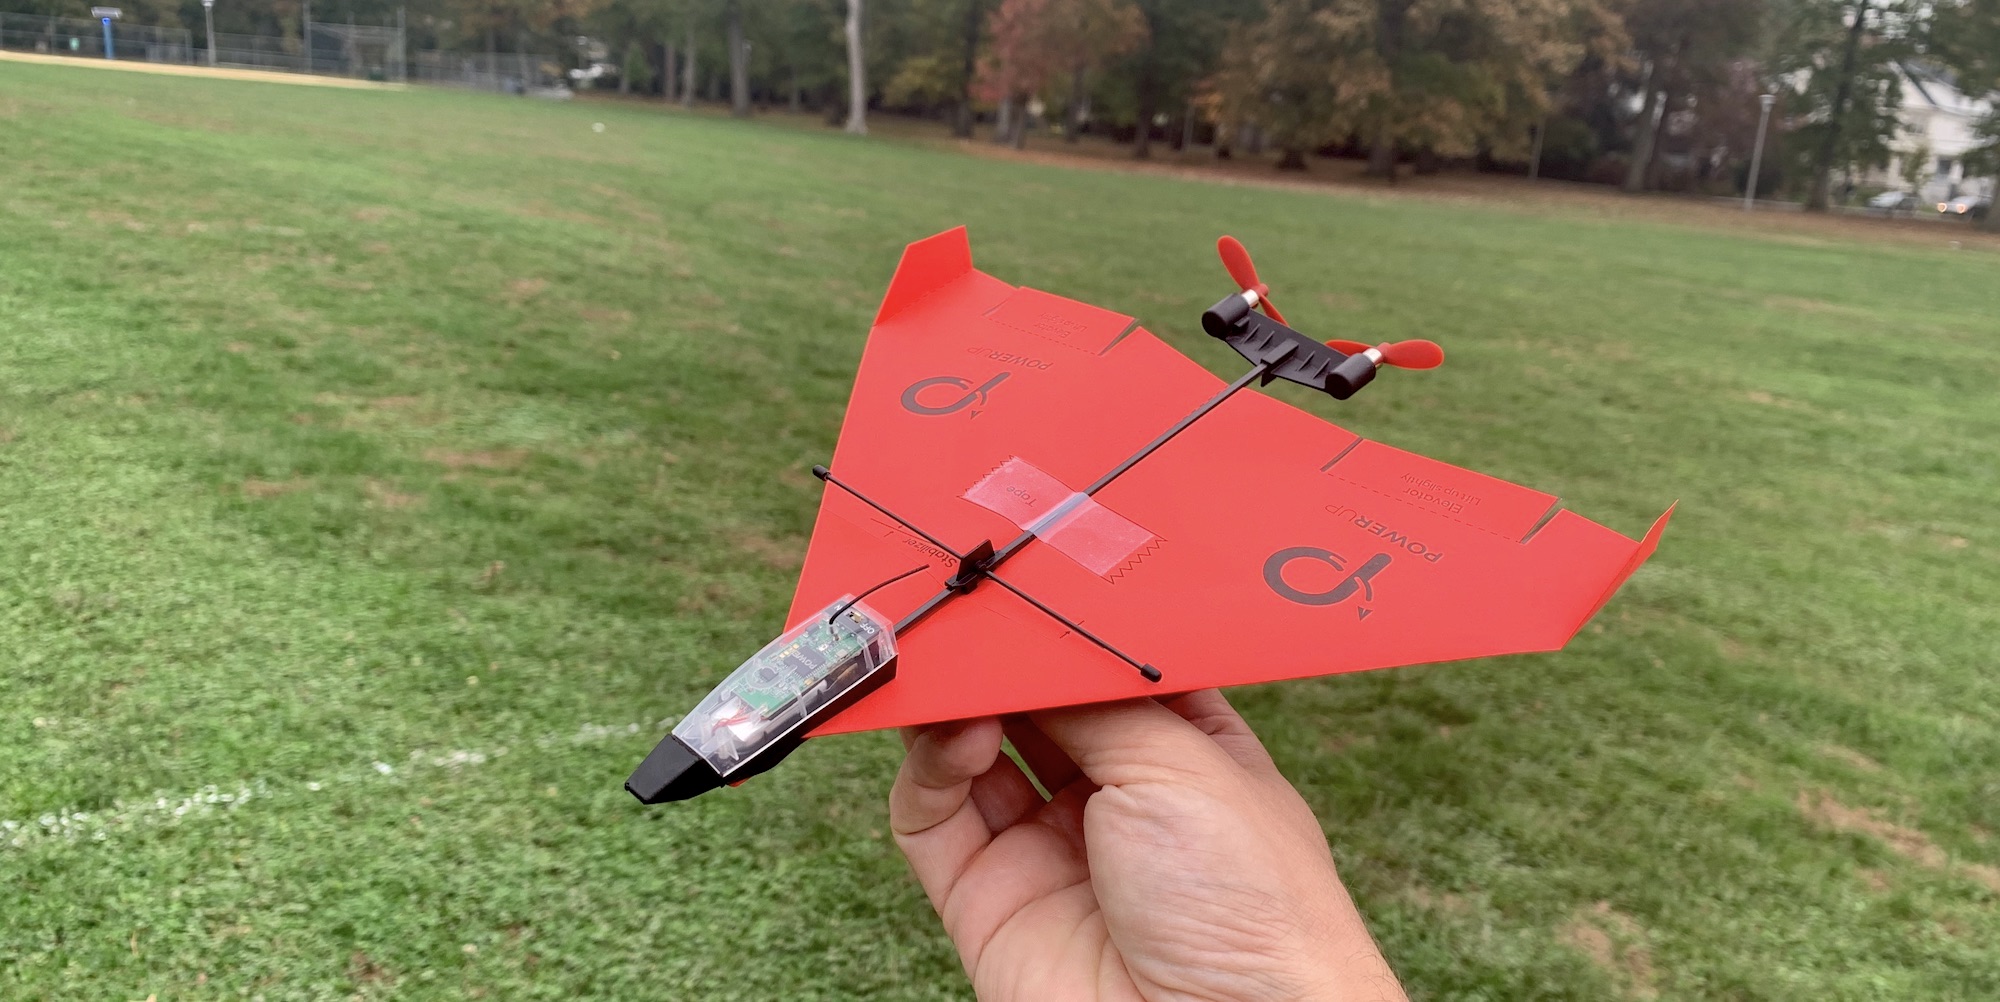 PowerUp 4.0 Smartphone Controlled Paper Airplane Kit